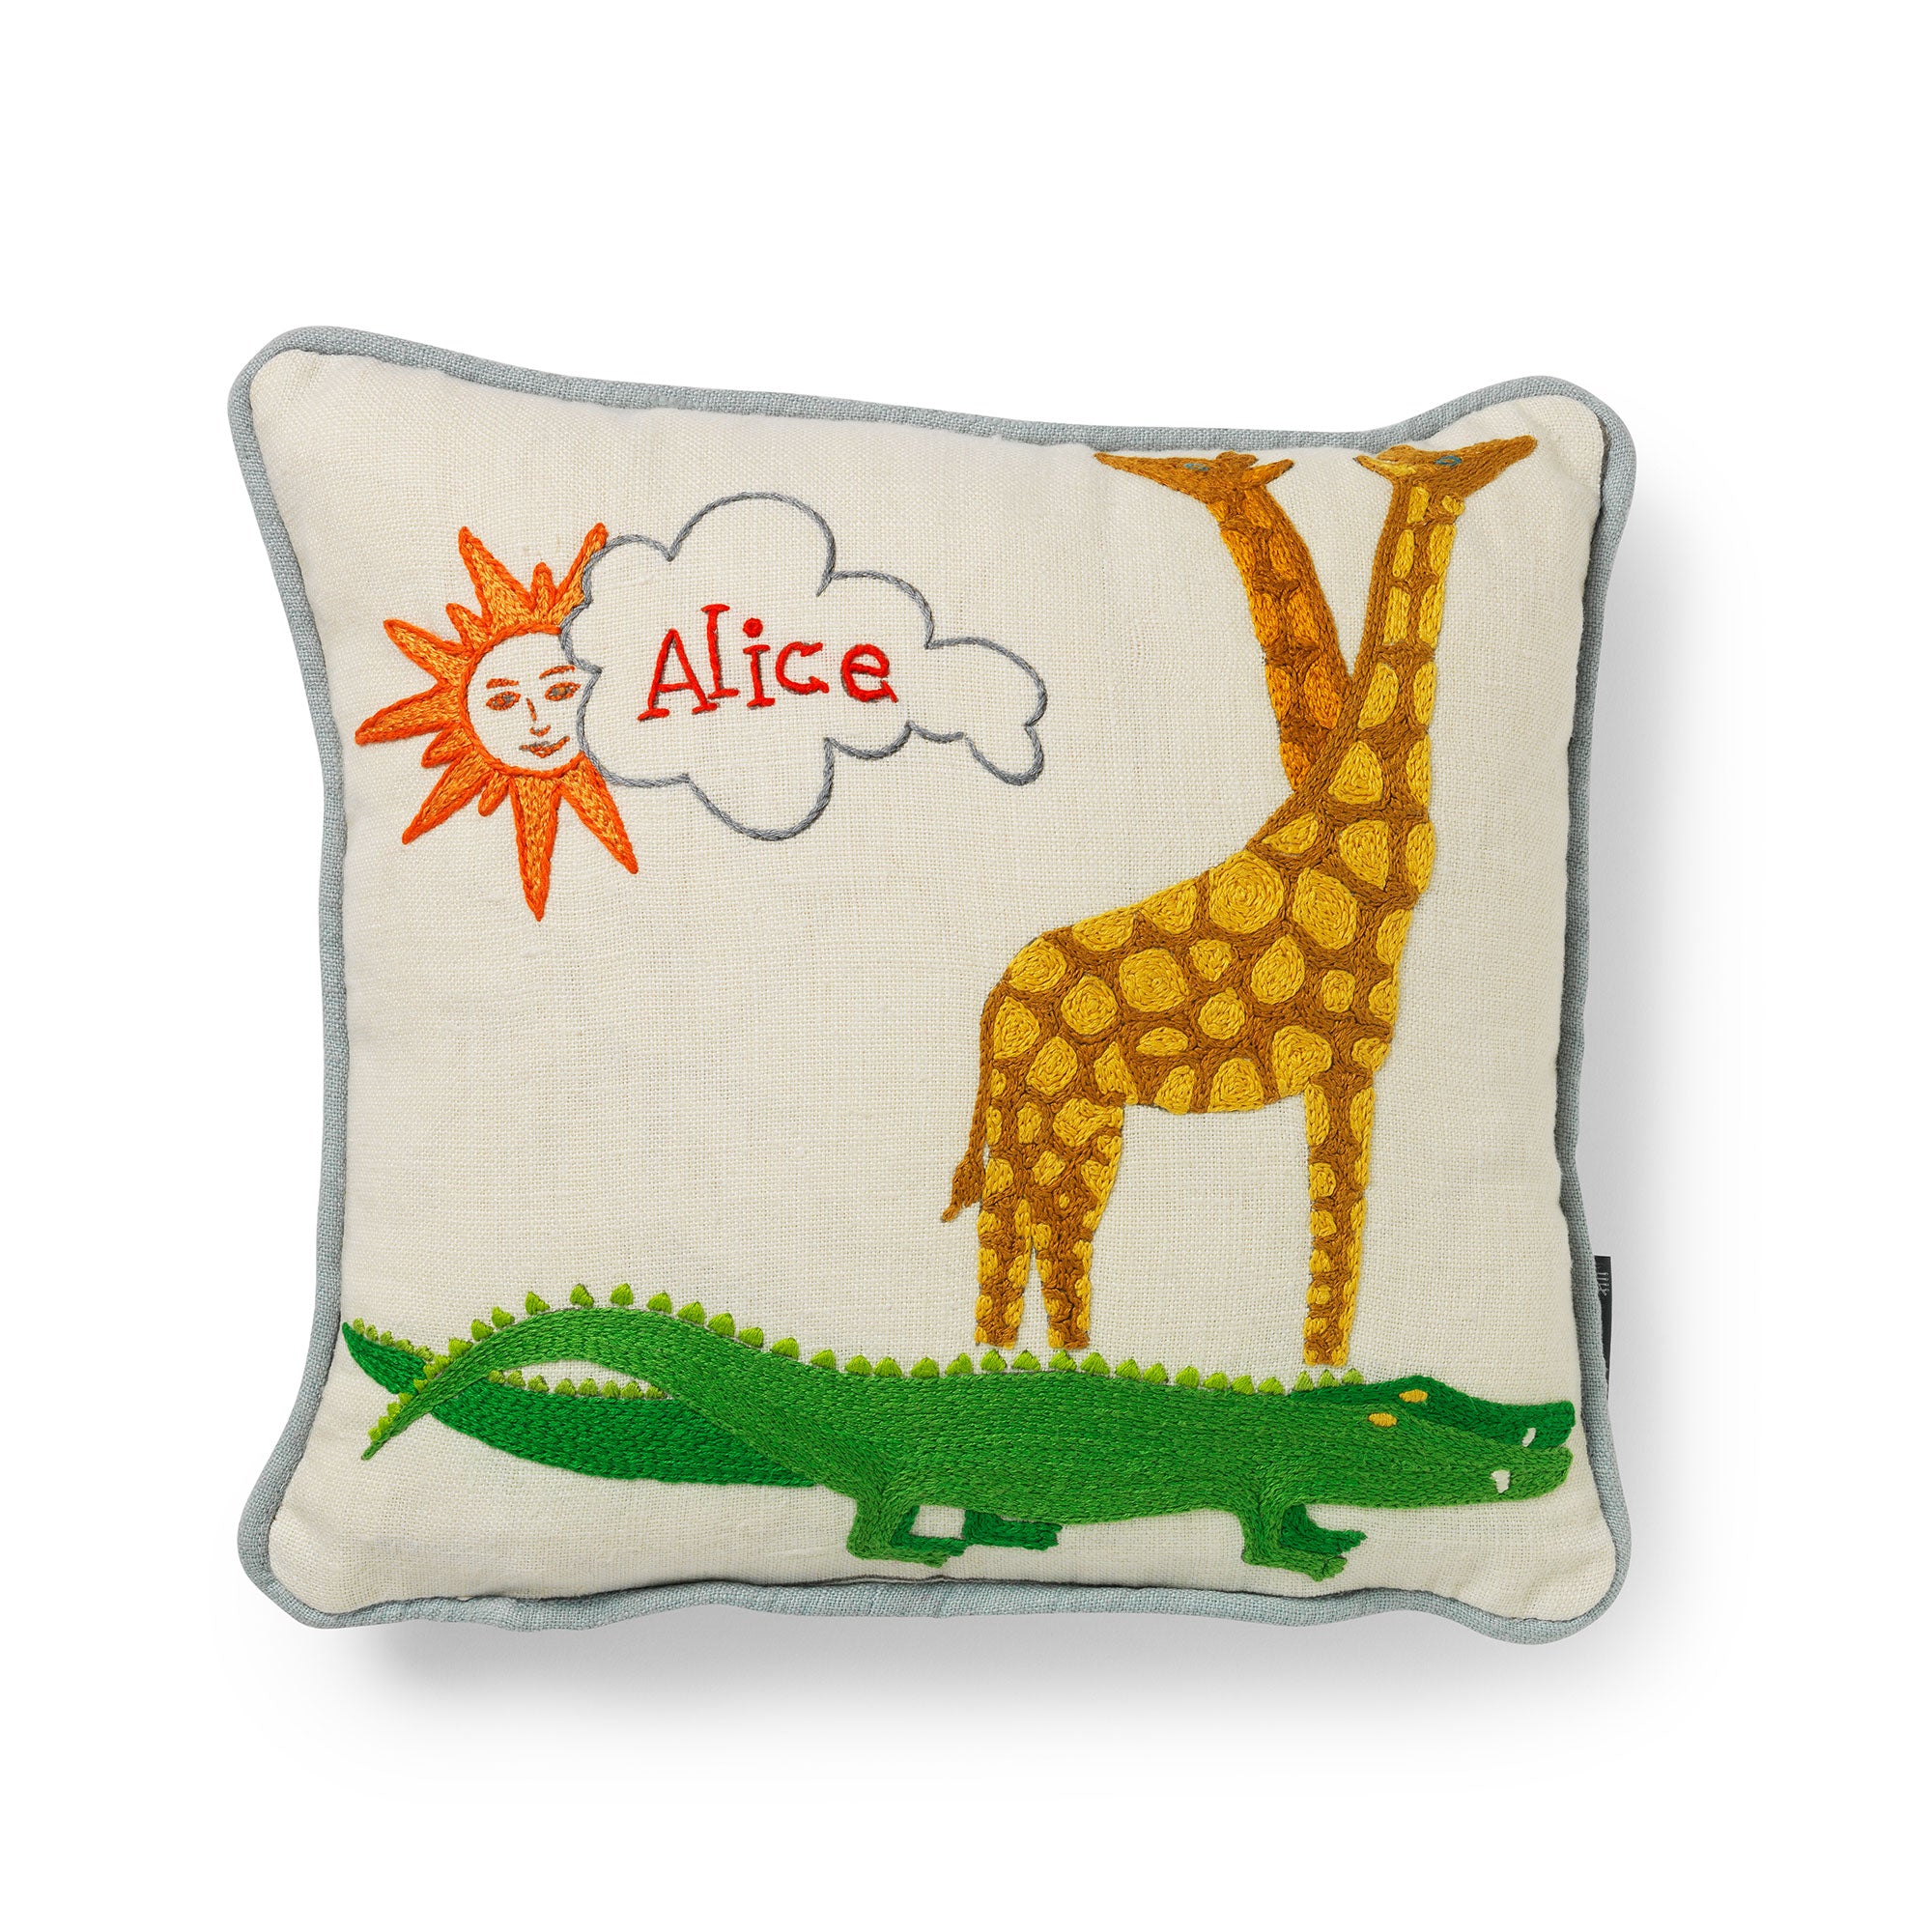 handstitched customised and personalised childrens crocodile cushion with name embroidered on